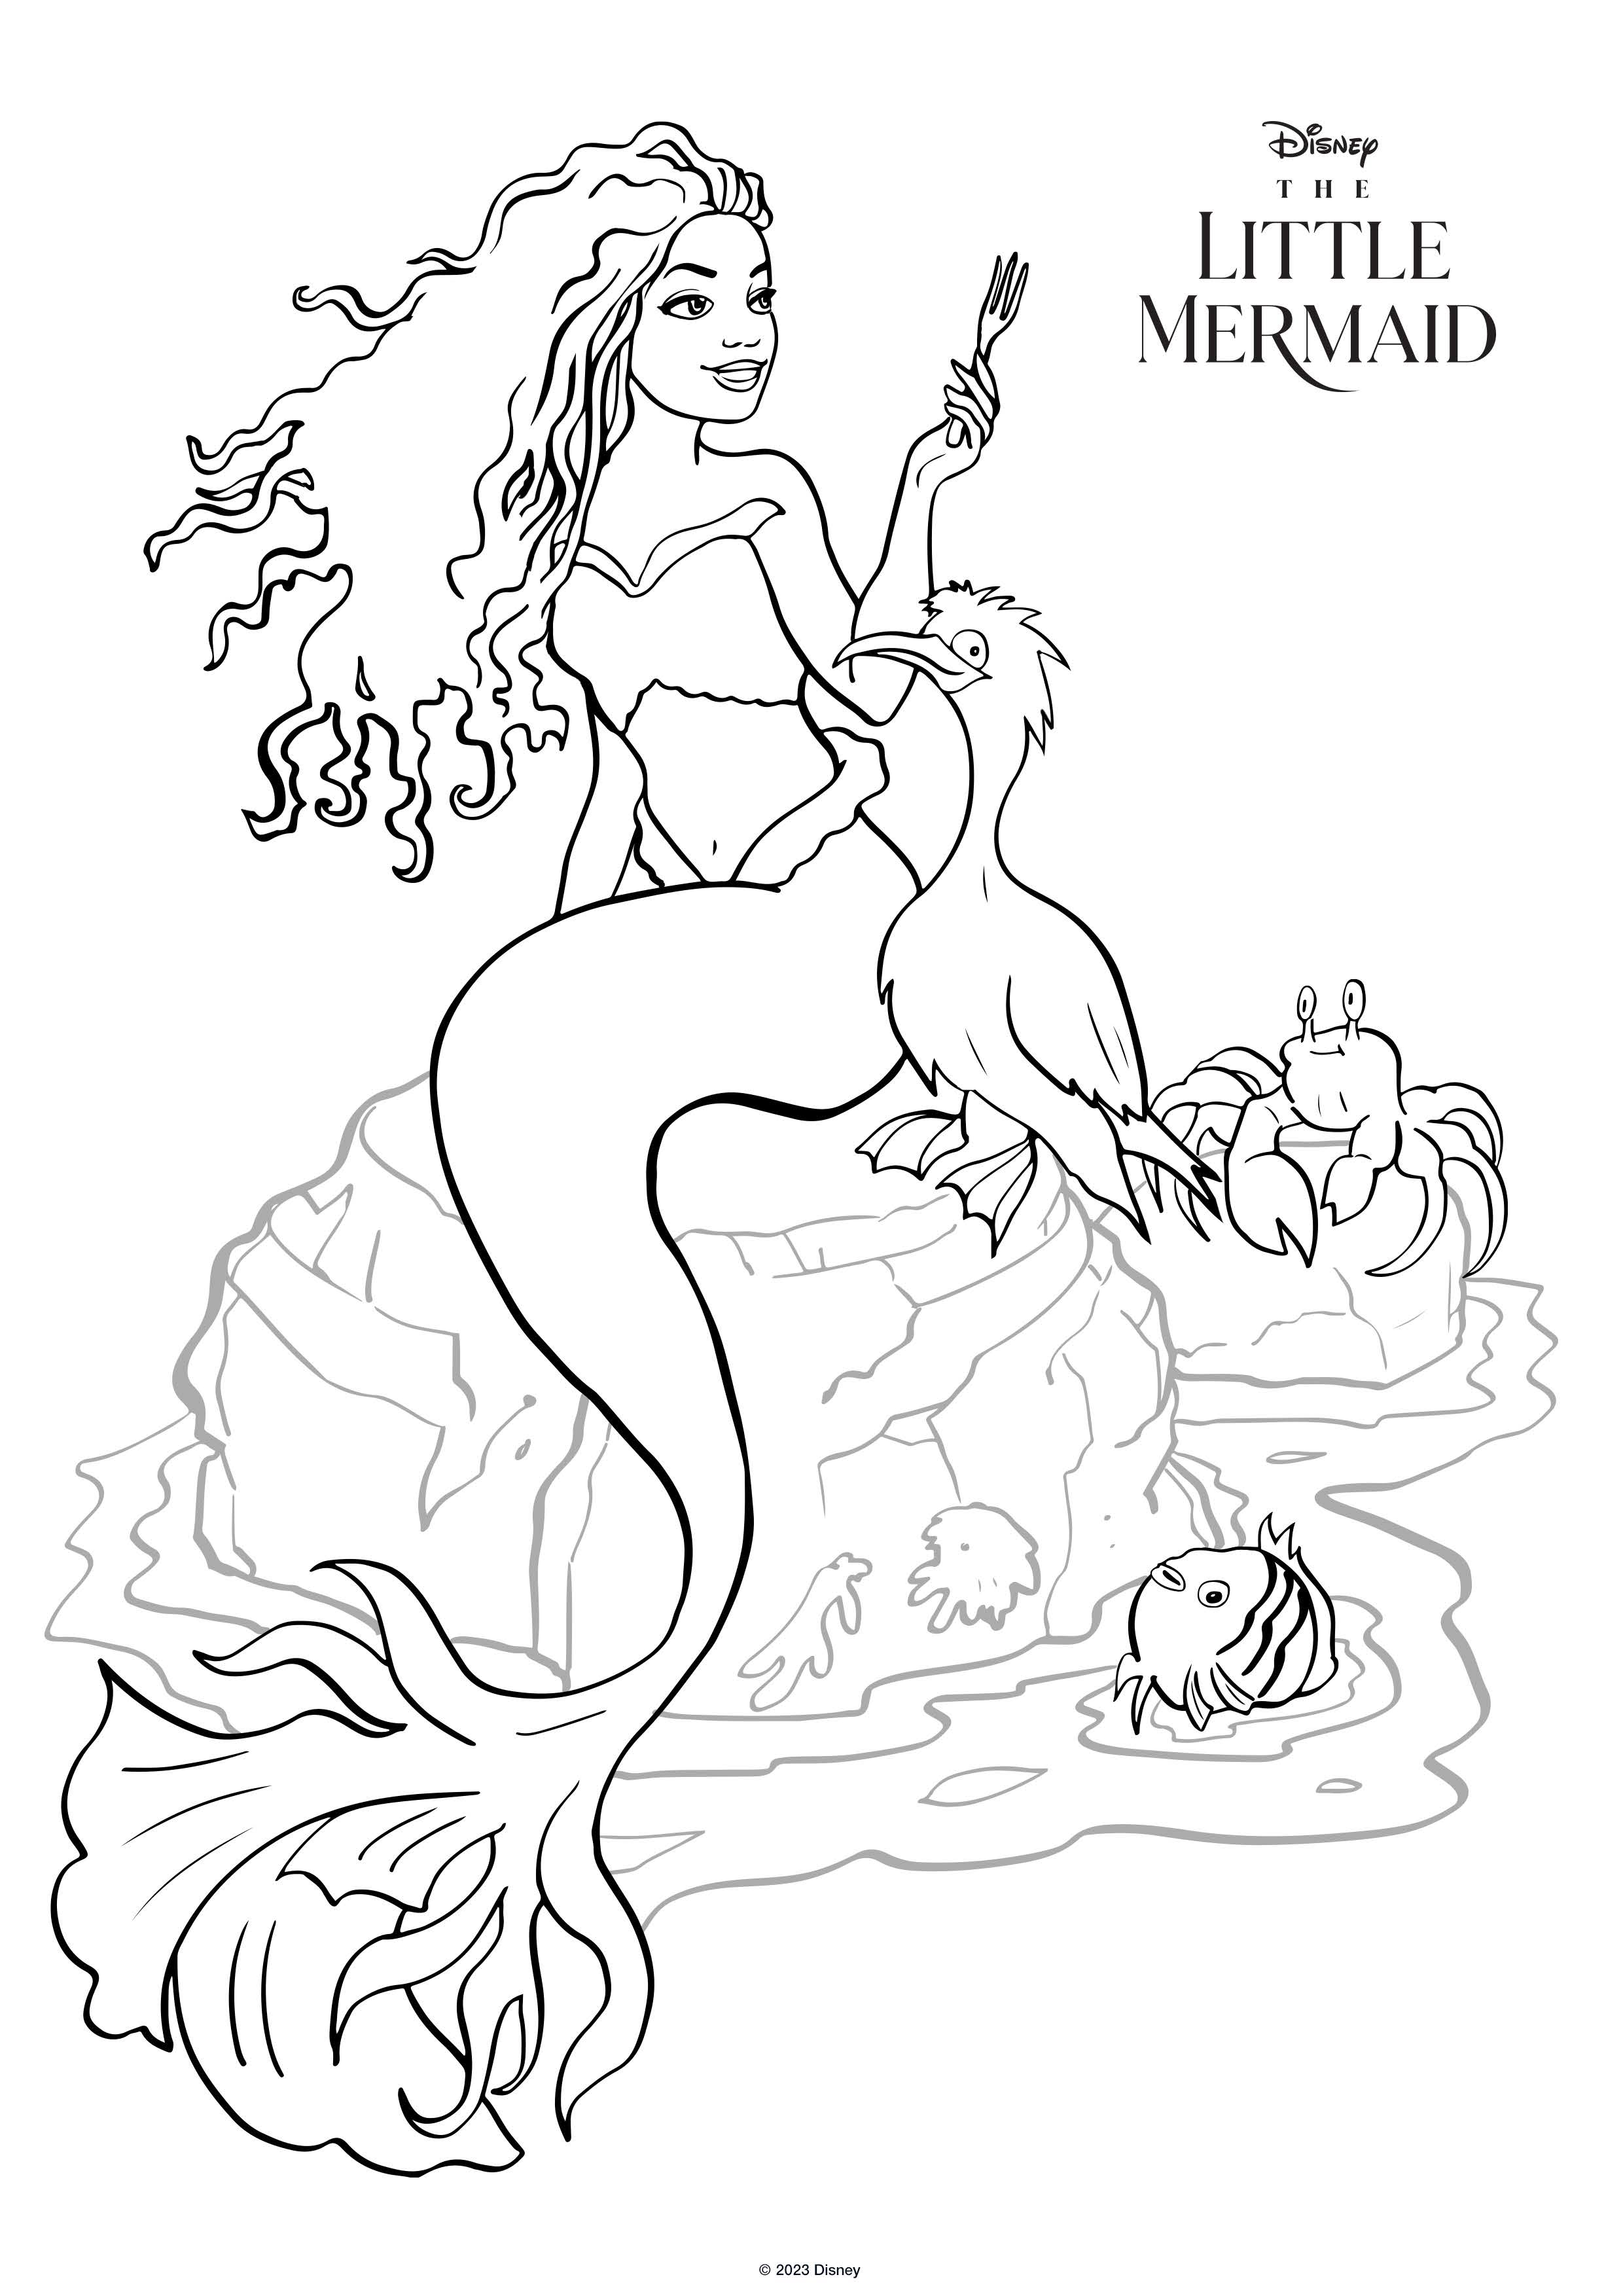 The little mermaid live action movie coloring pages with ariel halle bailey